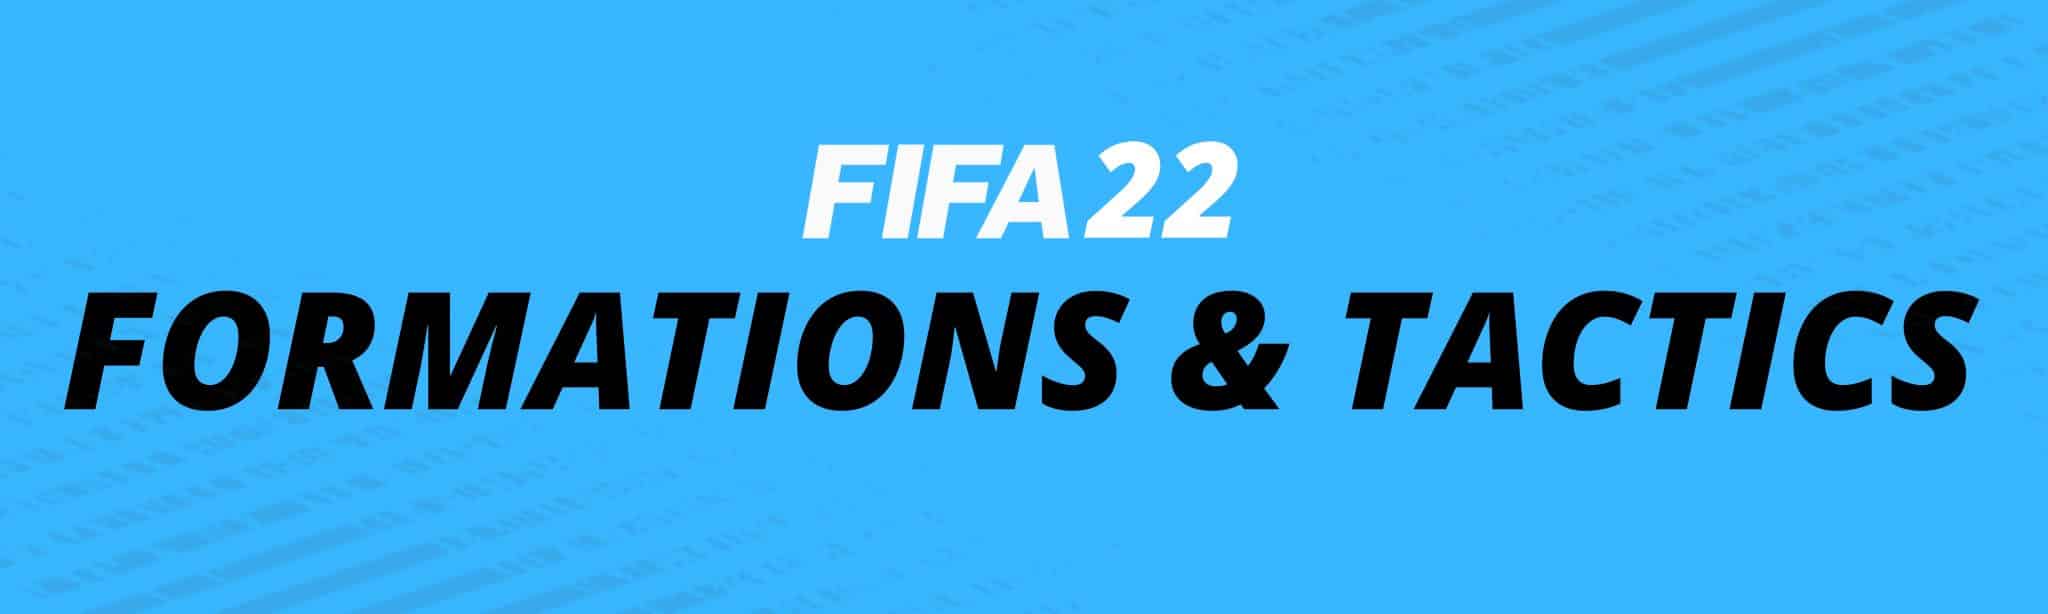 FIFA 22 PRO CLUBS BEST FORMATIONS